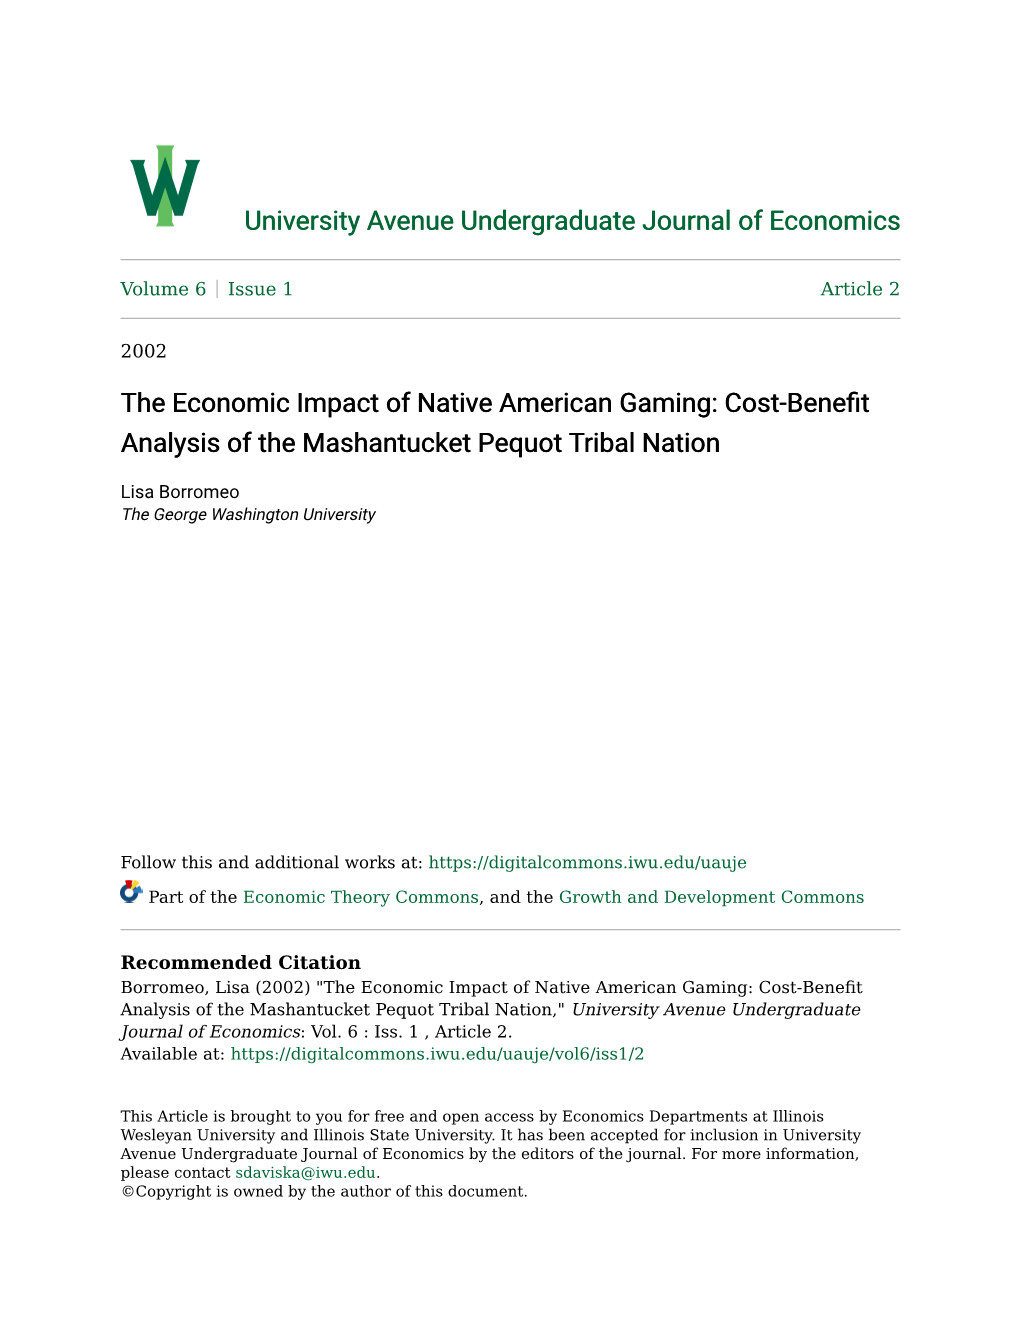 The Economic Impact of Native American Gaming: Cost-Benefit Analysis of the Mashantucket Pequot Tribal Nation